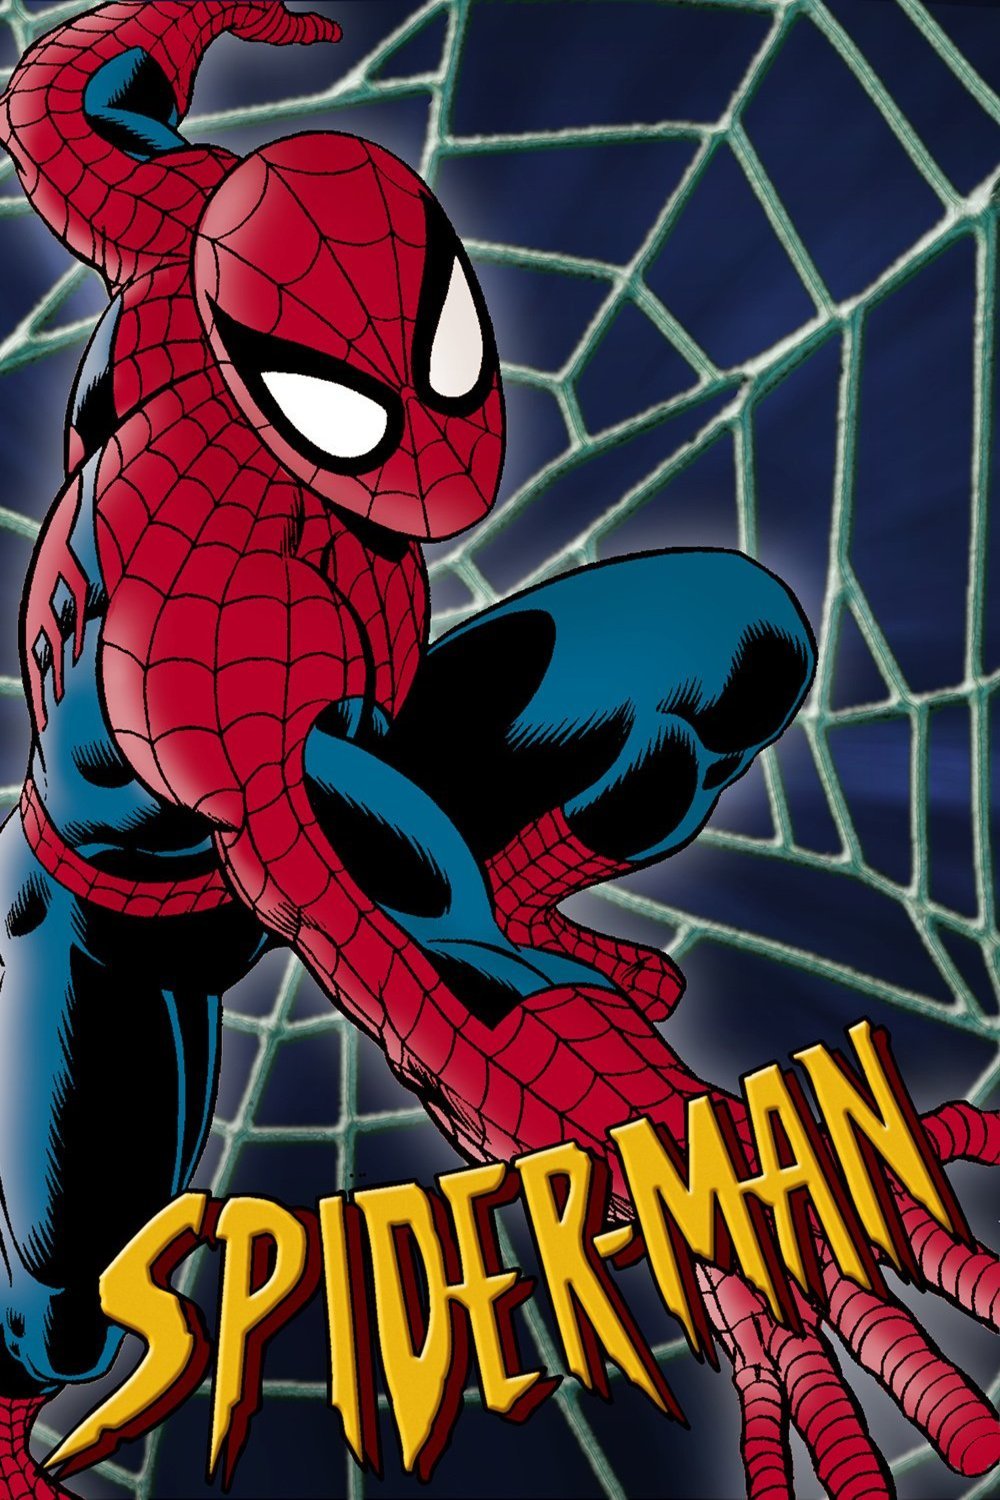 Poster of the movie Spider-Man